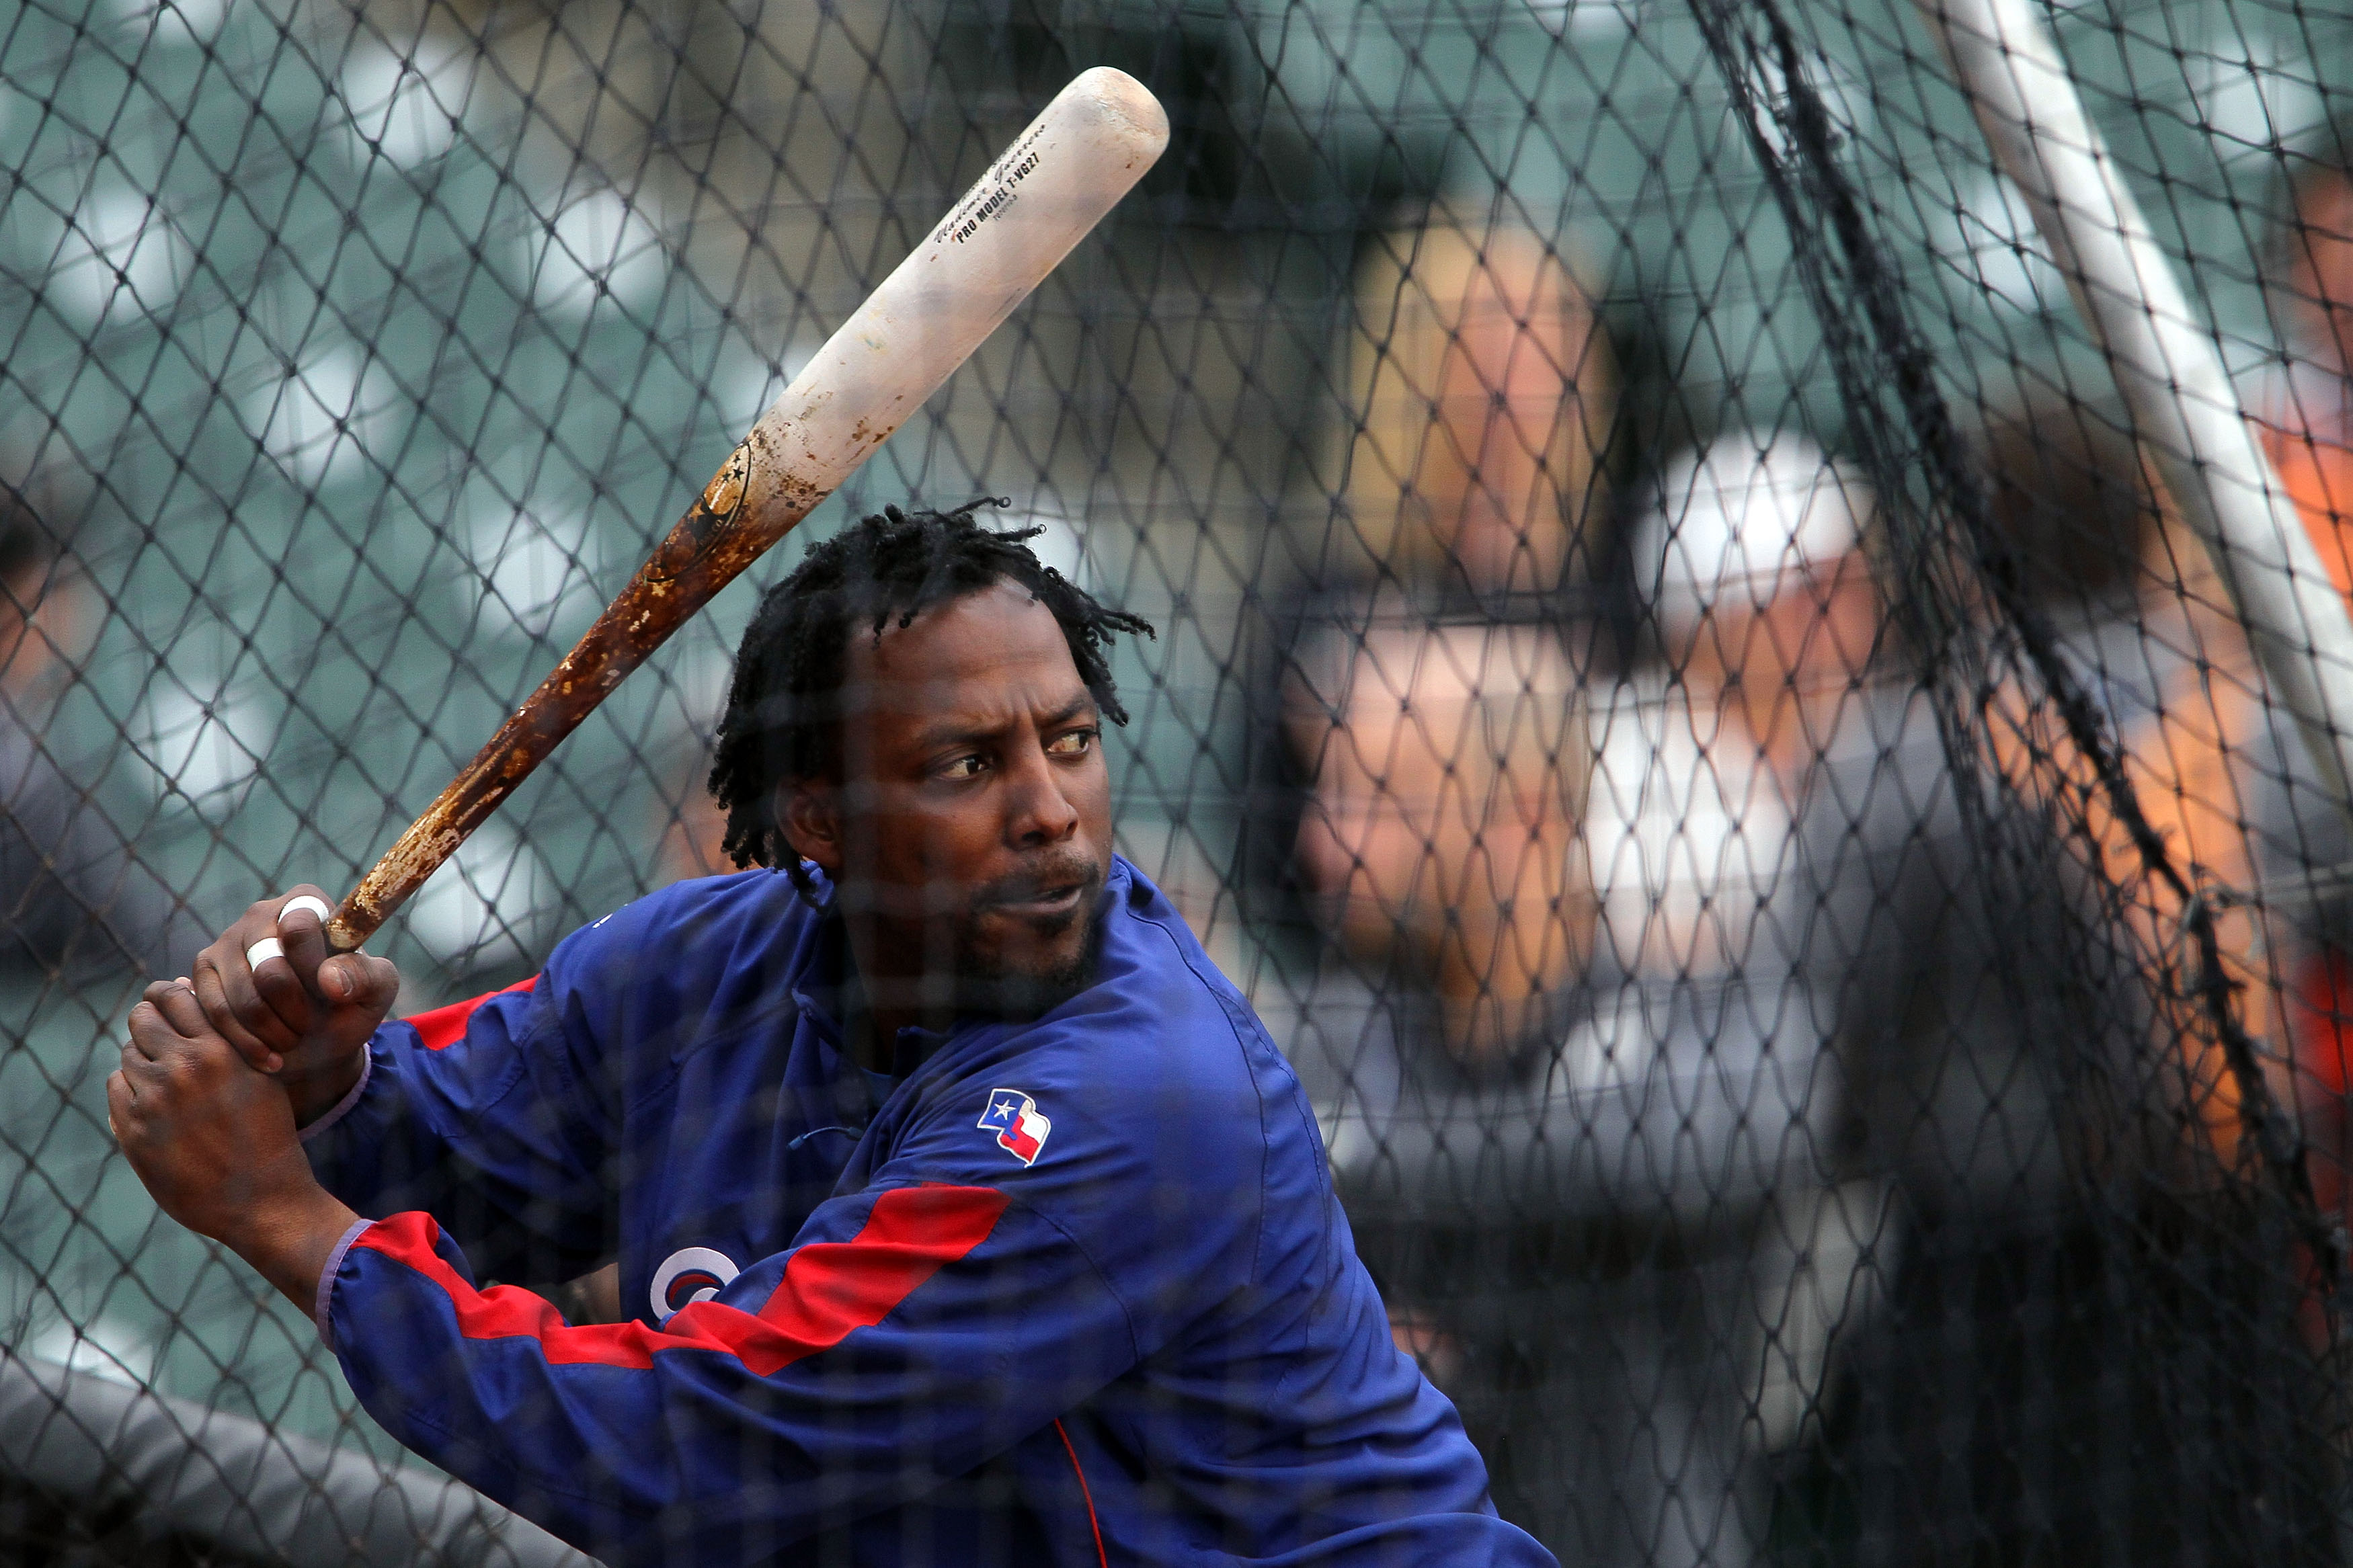 SAN FRANCISCO - OCTOBER 28:  Vladimir Guerrero #27 of the Texas Rangers takes batting practice before Game Two of the 2010 MLB World Series against the San Francisco Giants at AT&T Park on October 28, 2010 in San Francisco, California.  (Photo by Justin S